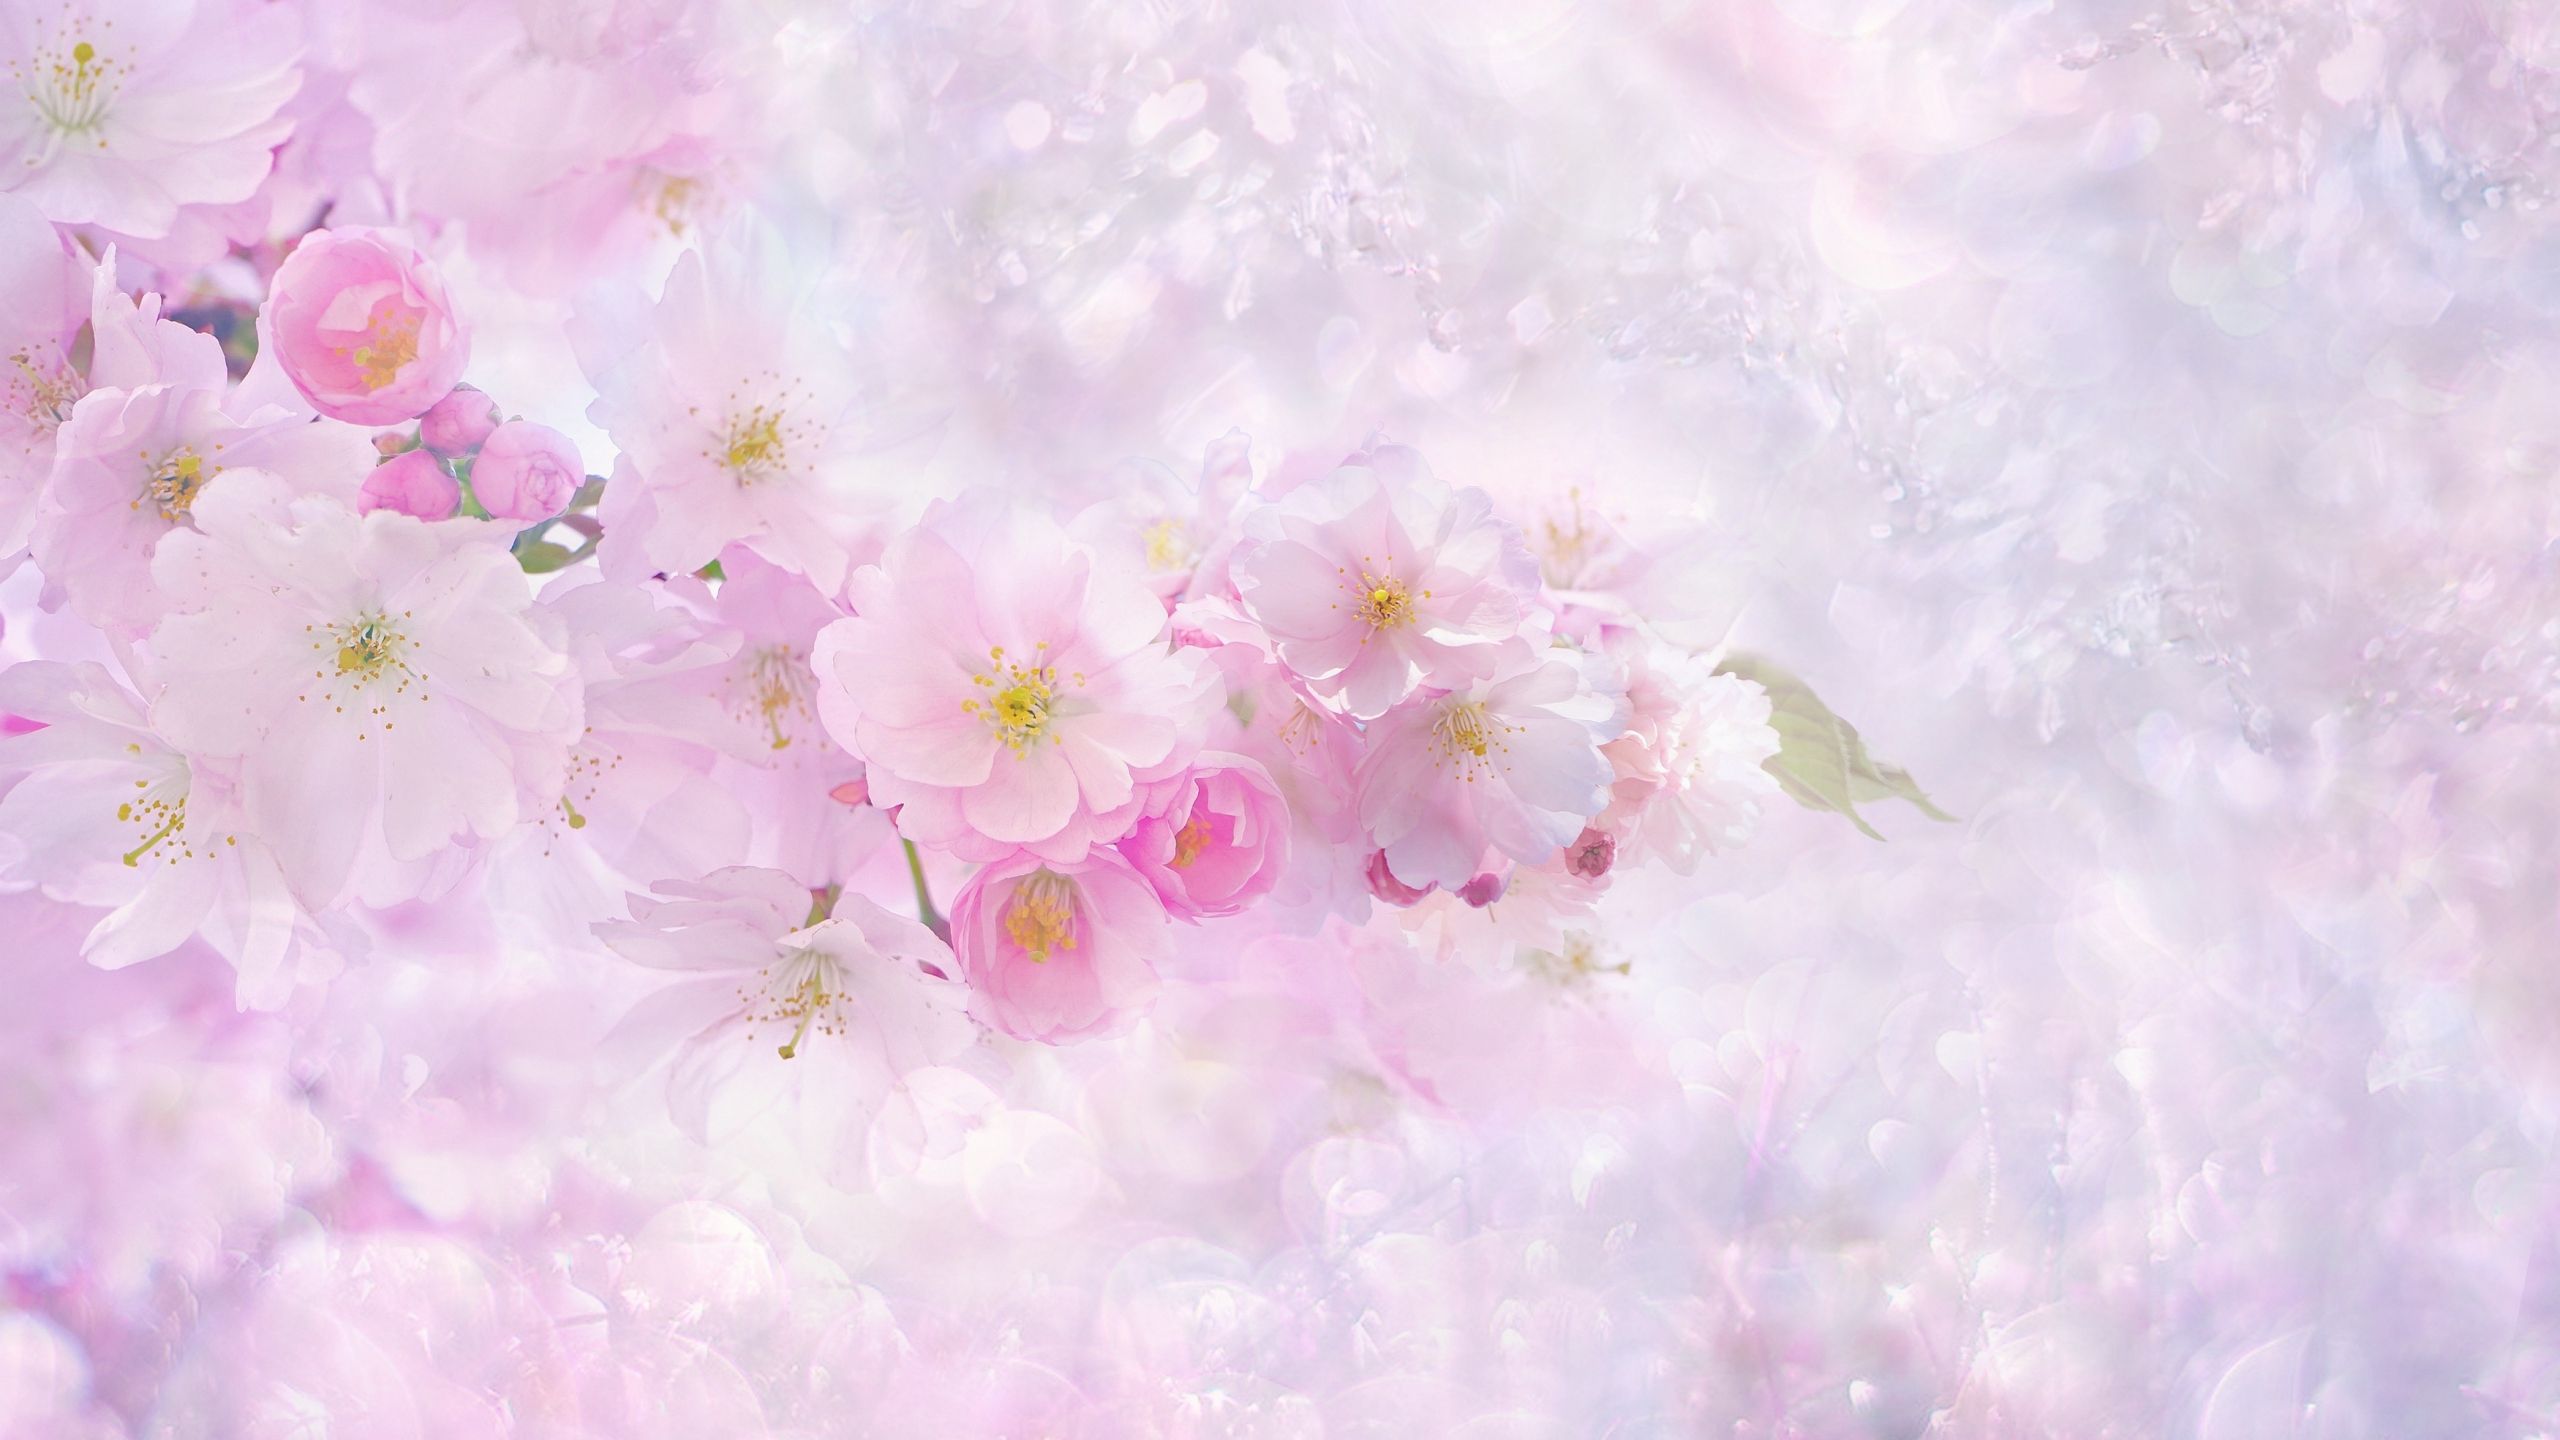 Desktop Wallpaper Nature, Spring, Blossom, Cherry Flowers, Nature, HD Image, Picture, Background, 449c29